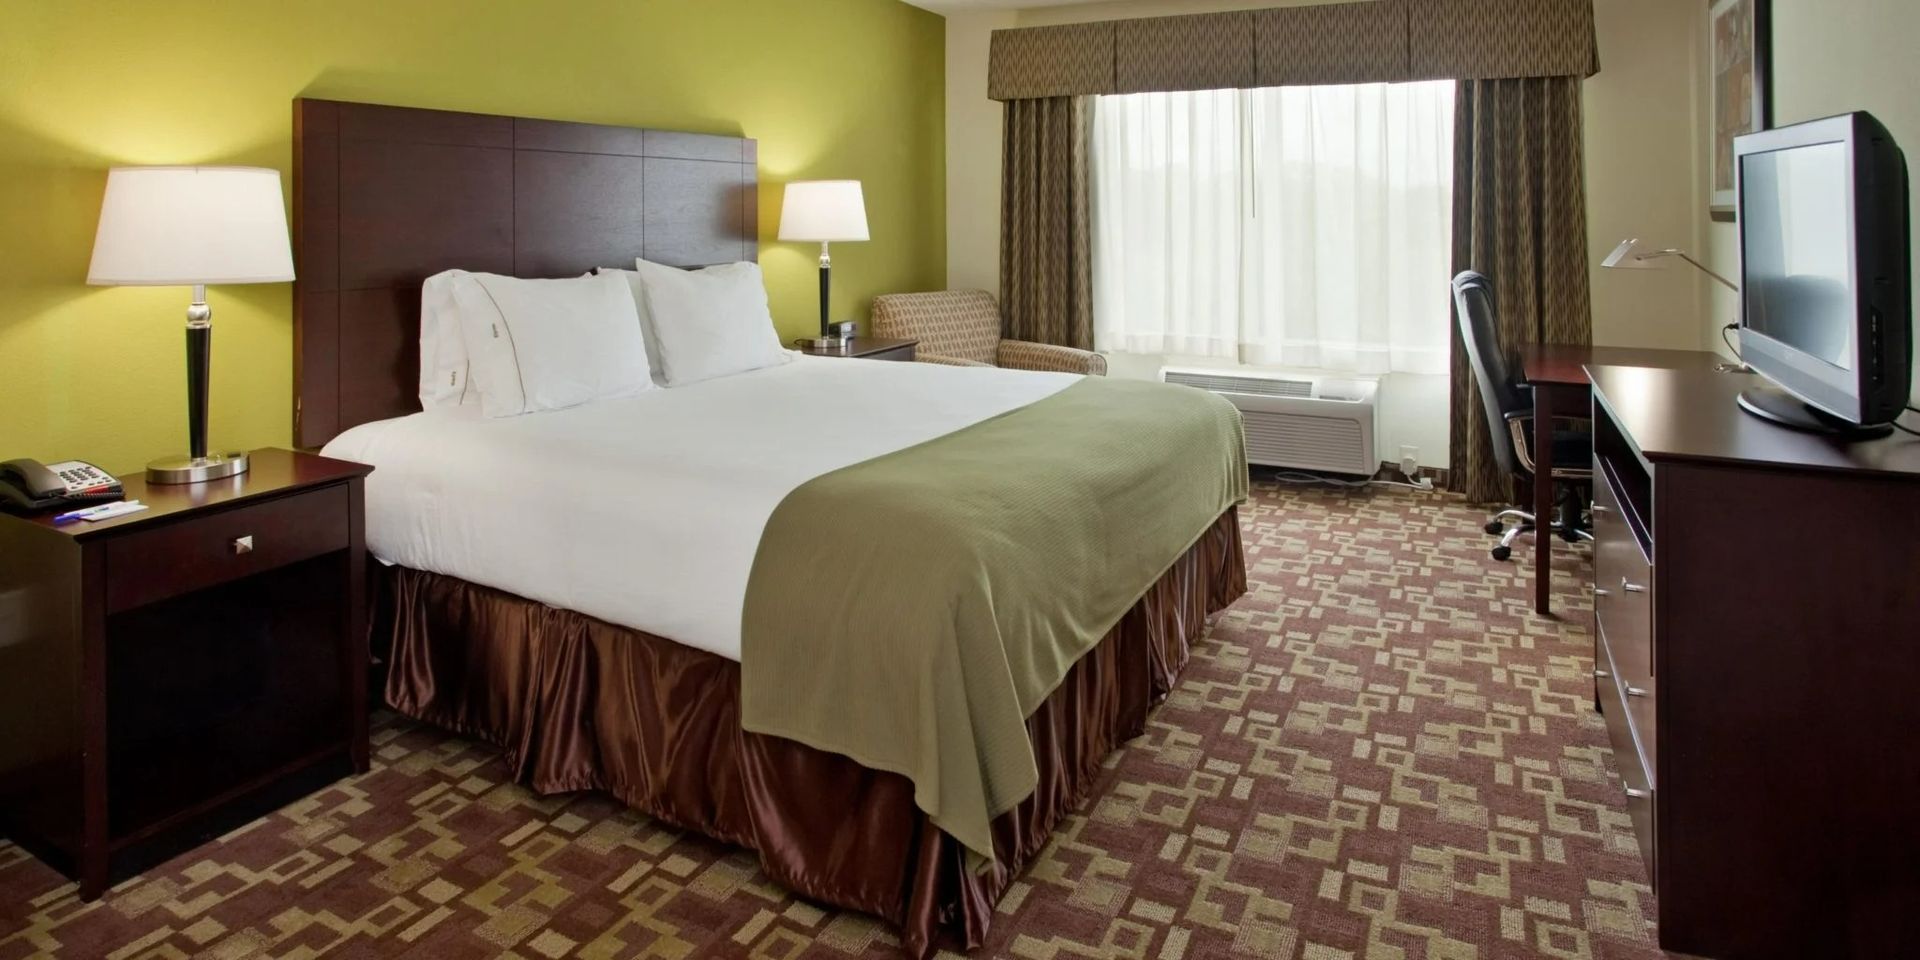 Holiday Inn Express and Suites – Orange County, CA – Designing Women of OC